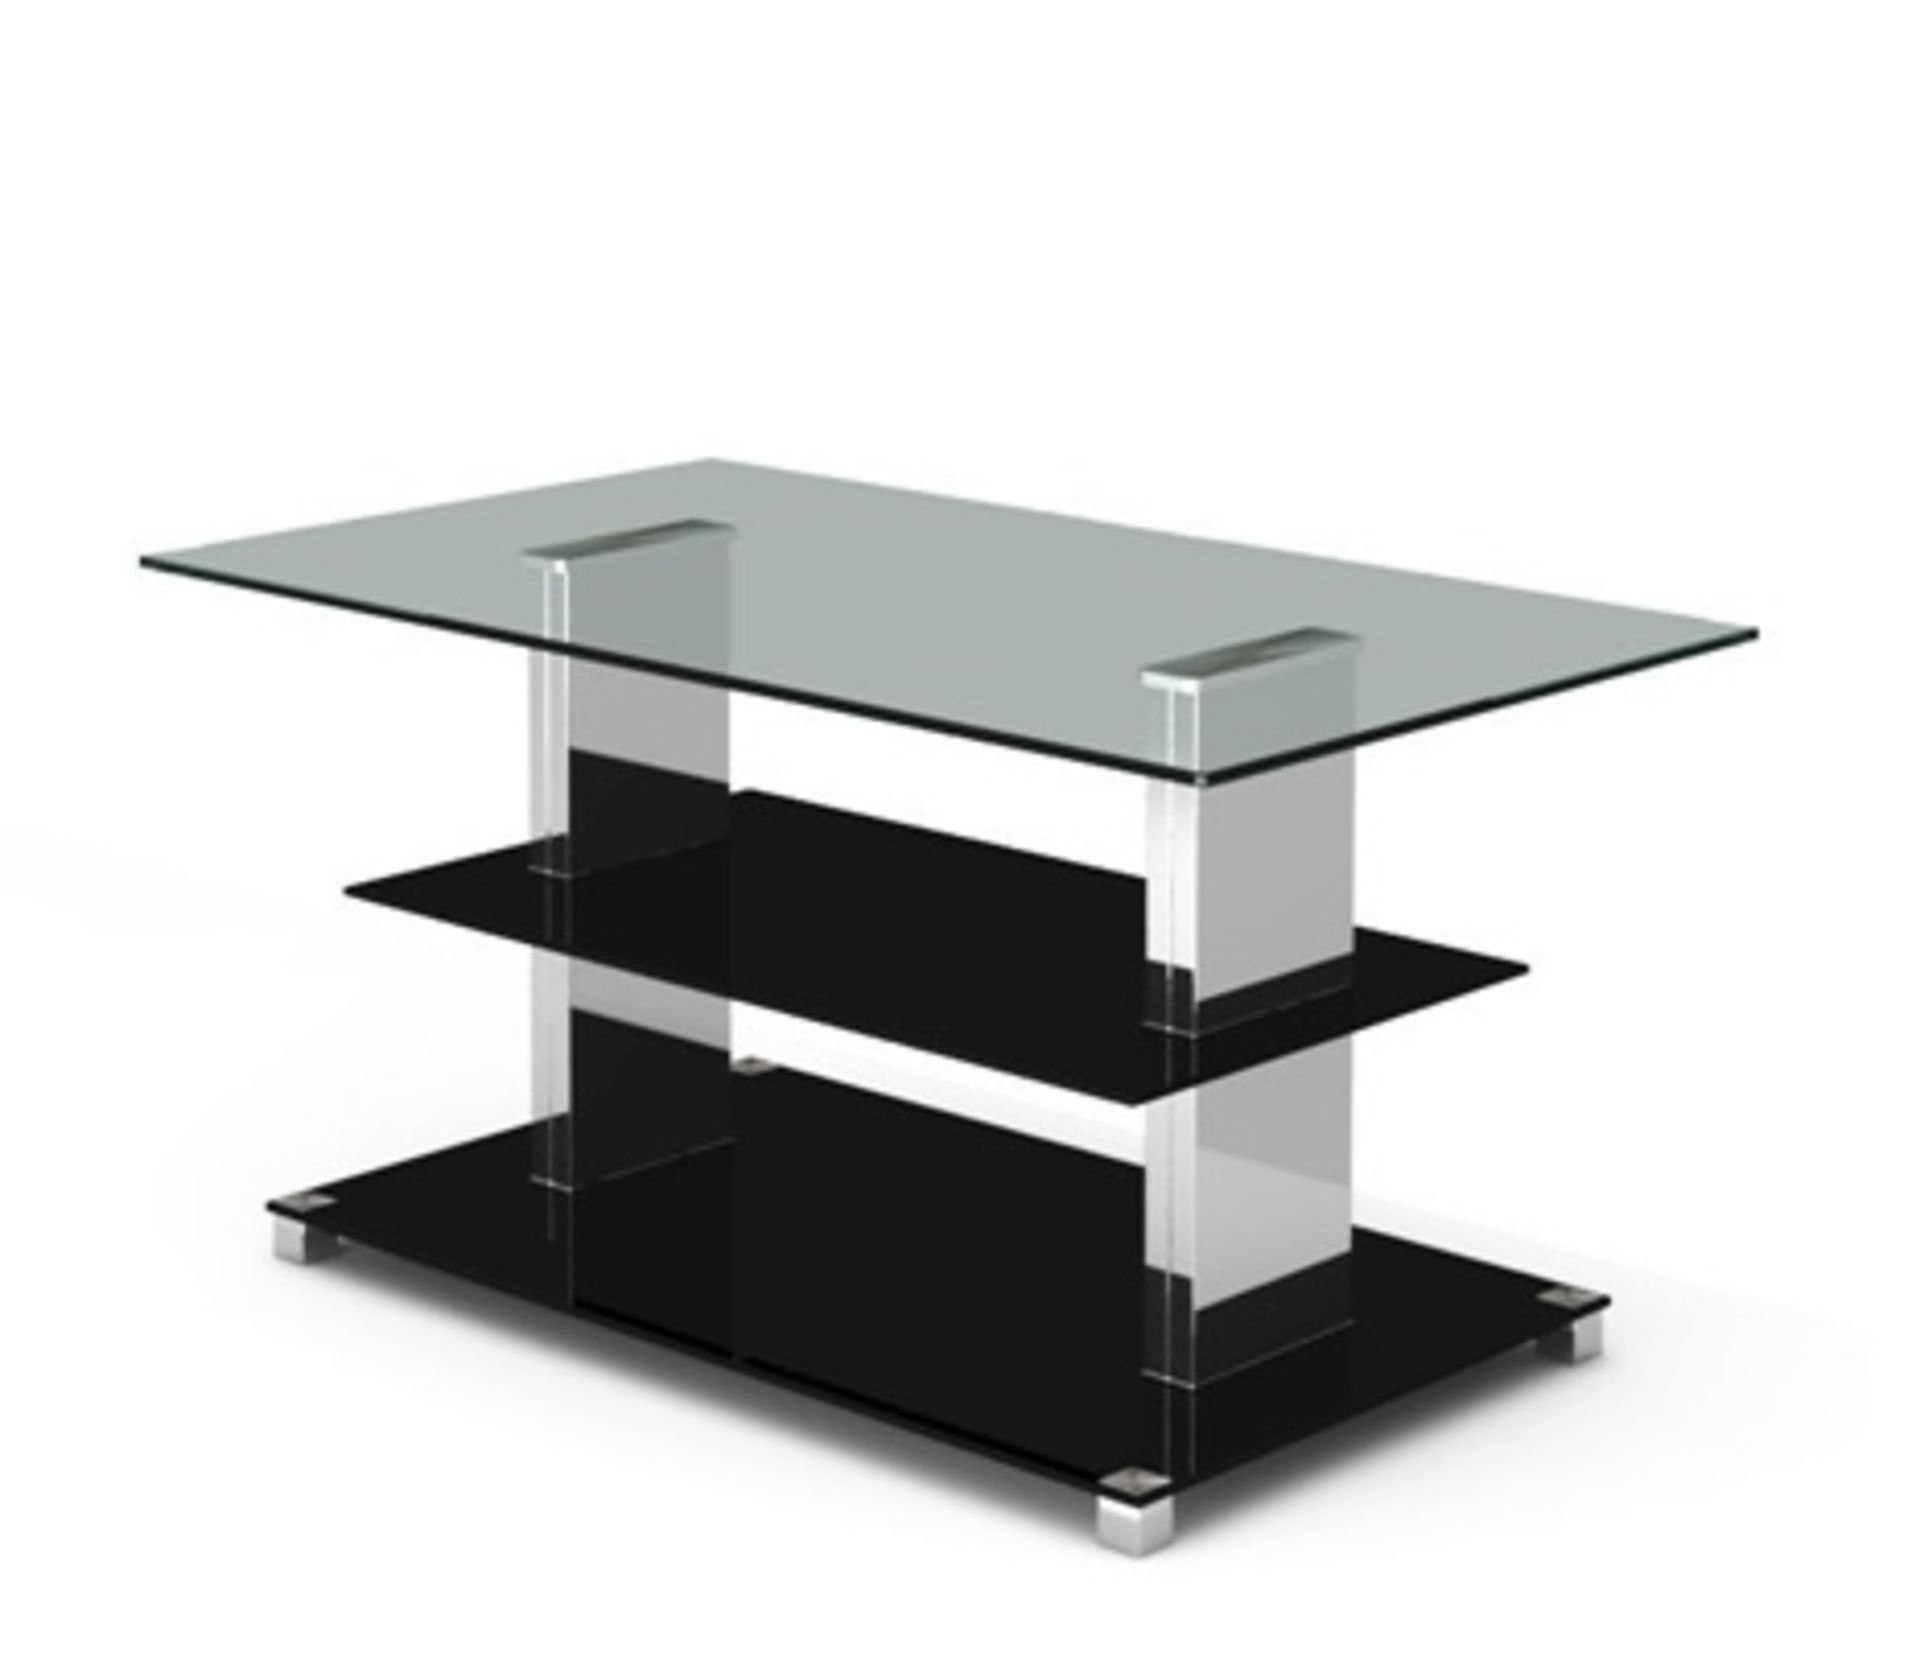 1 x Black Glass/Chrome Coffee Table - New & Boxed